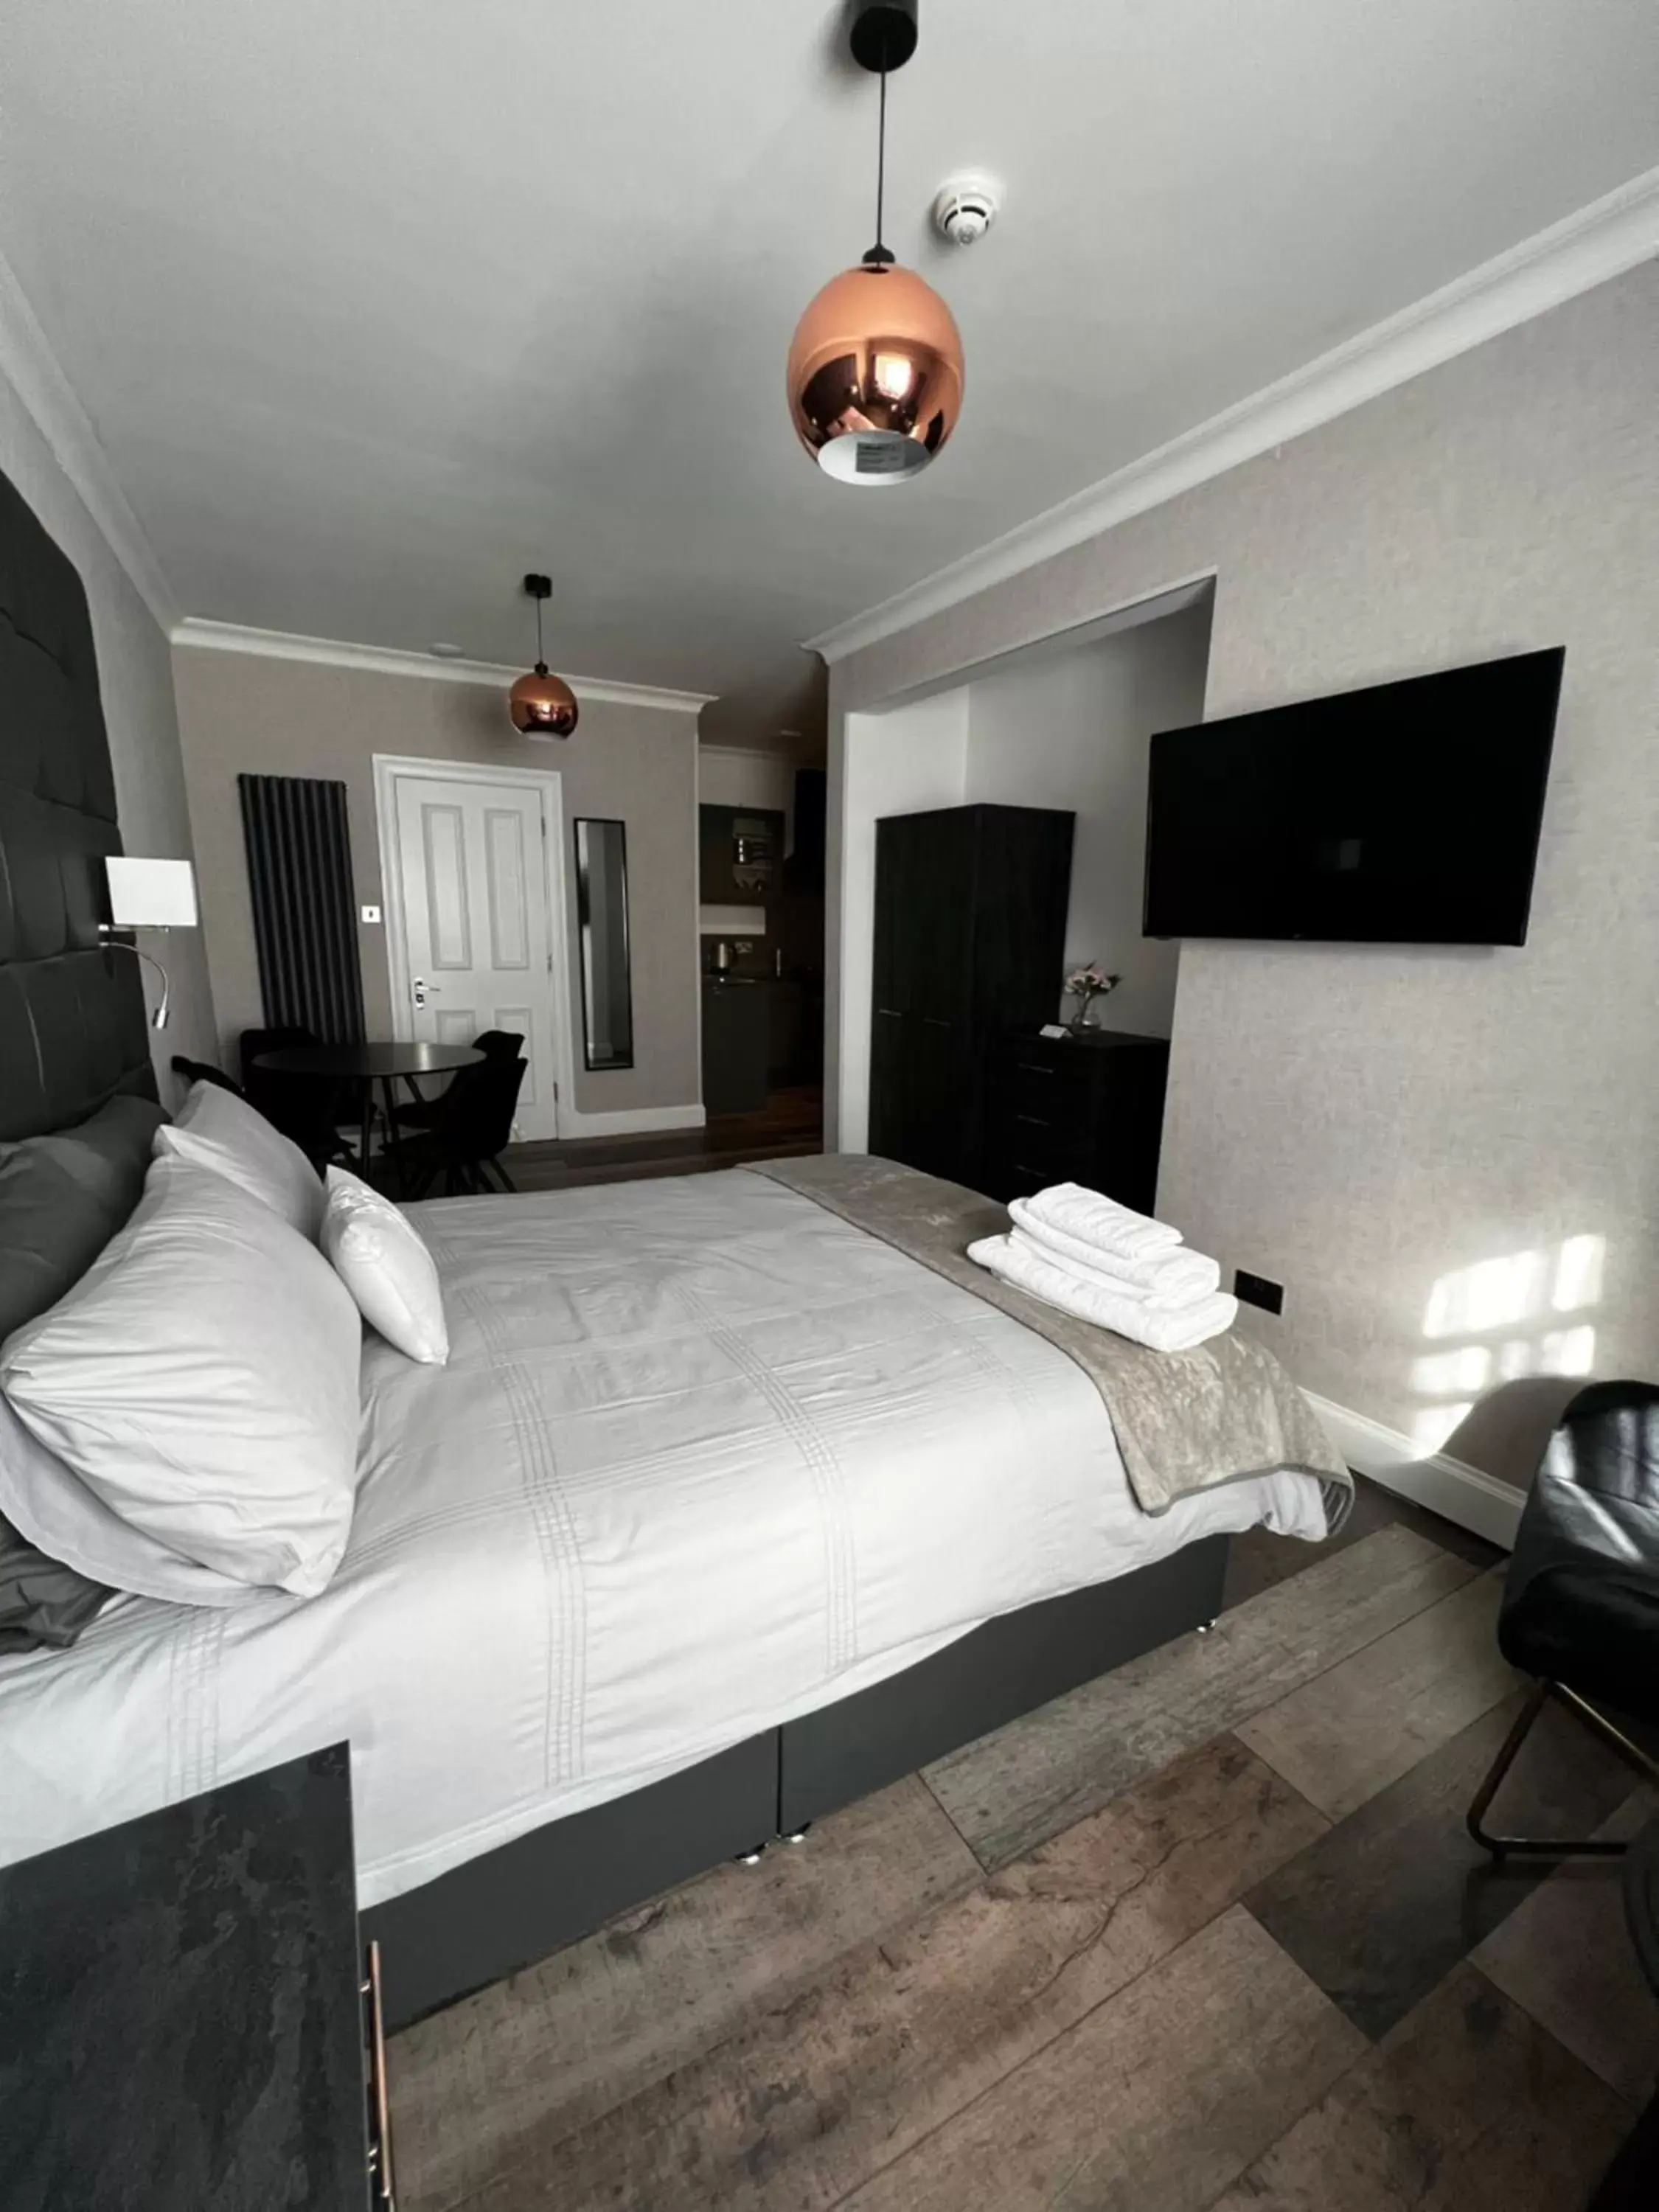 Bed in Amani Apartments - Glasgow City Centre